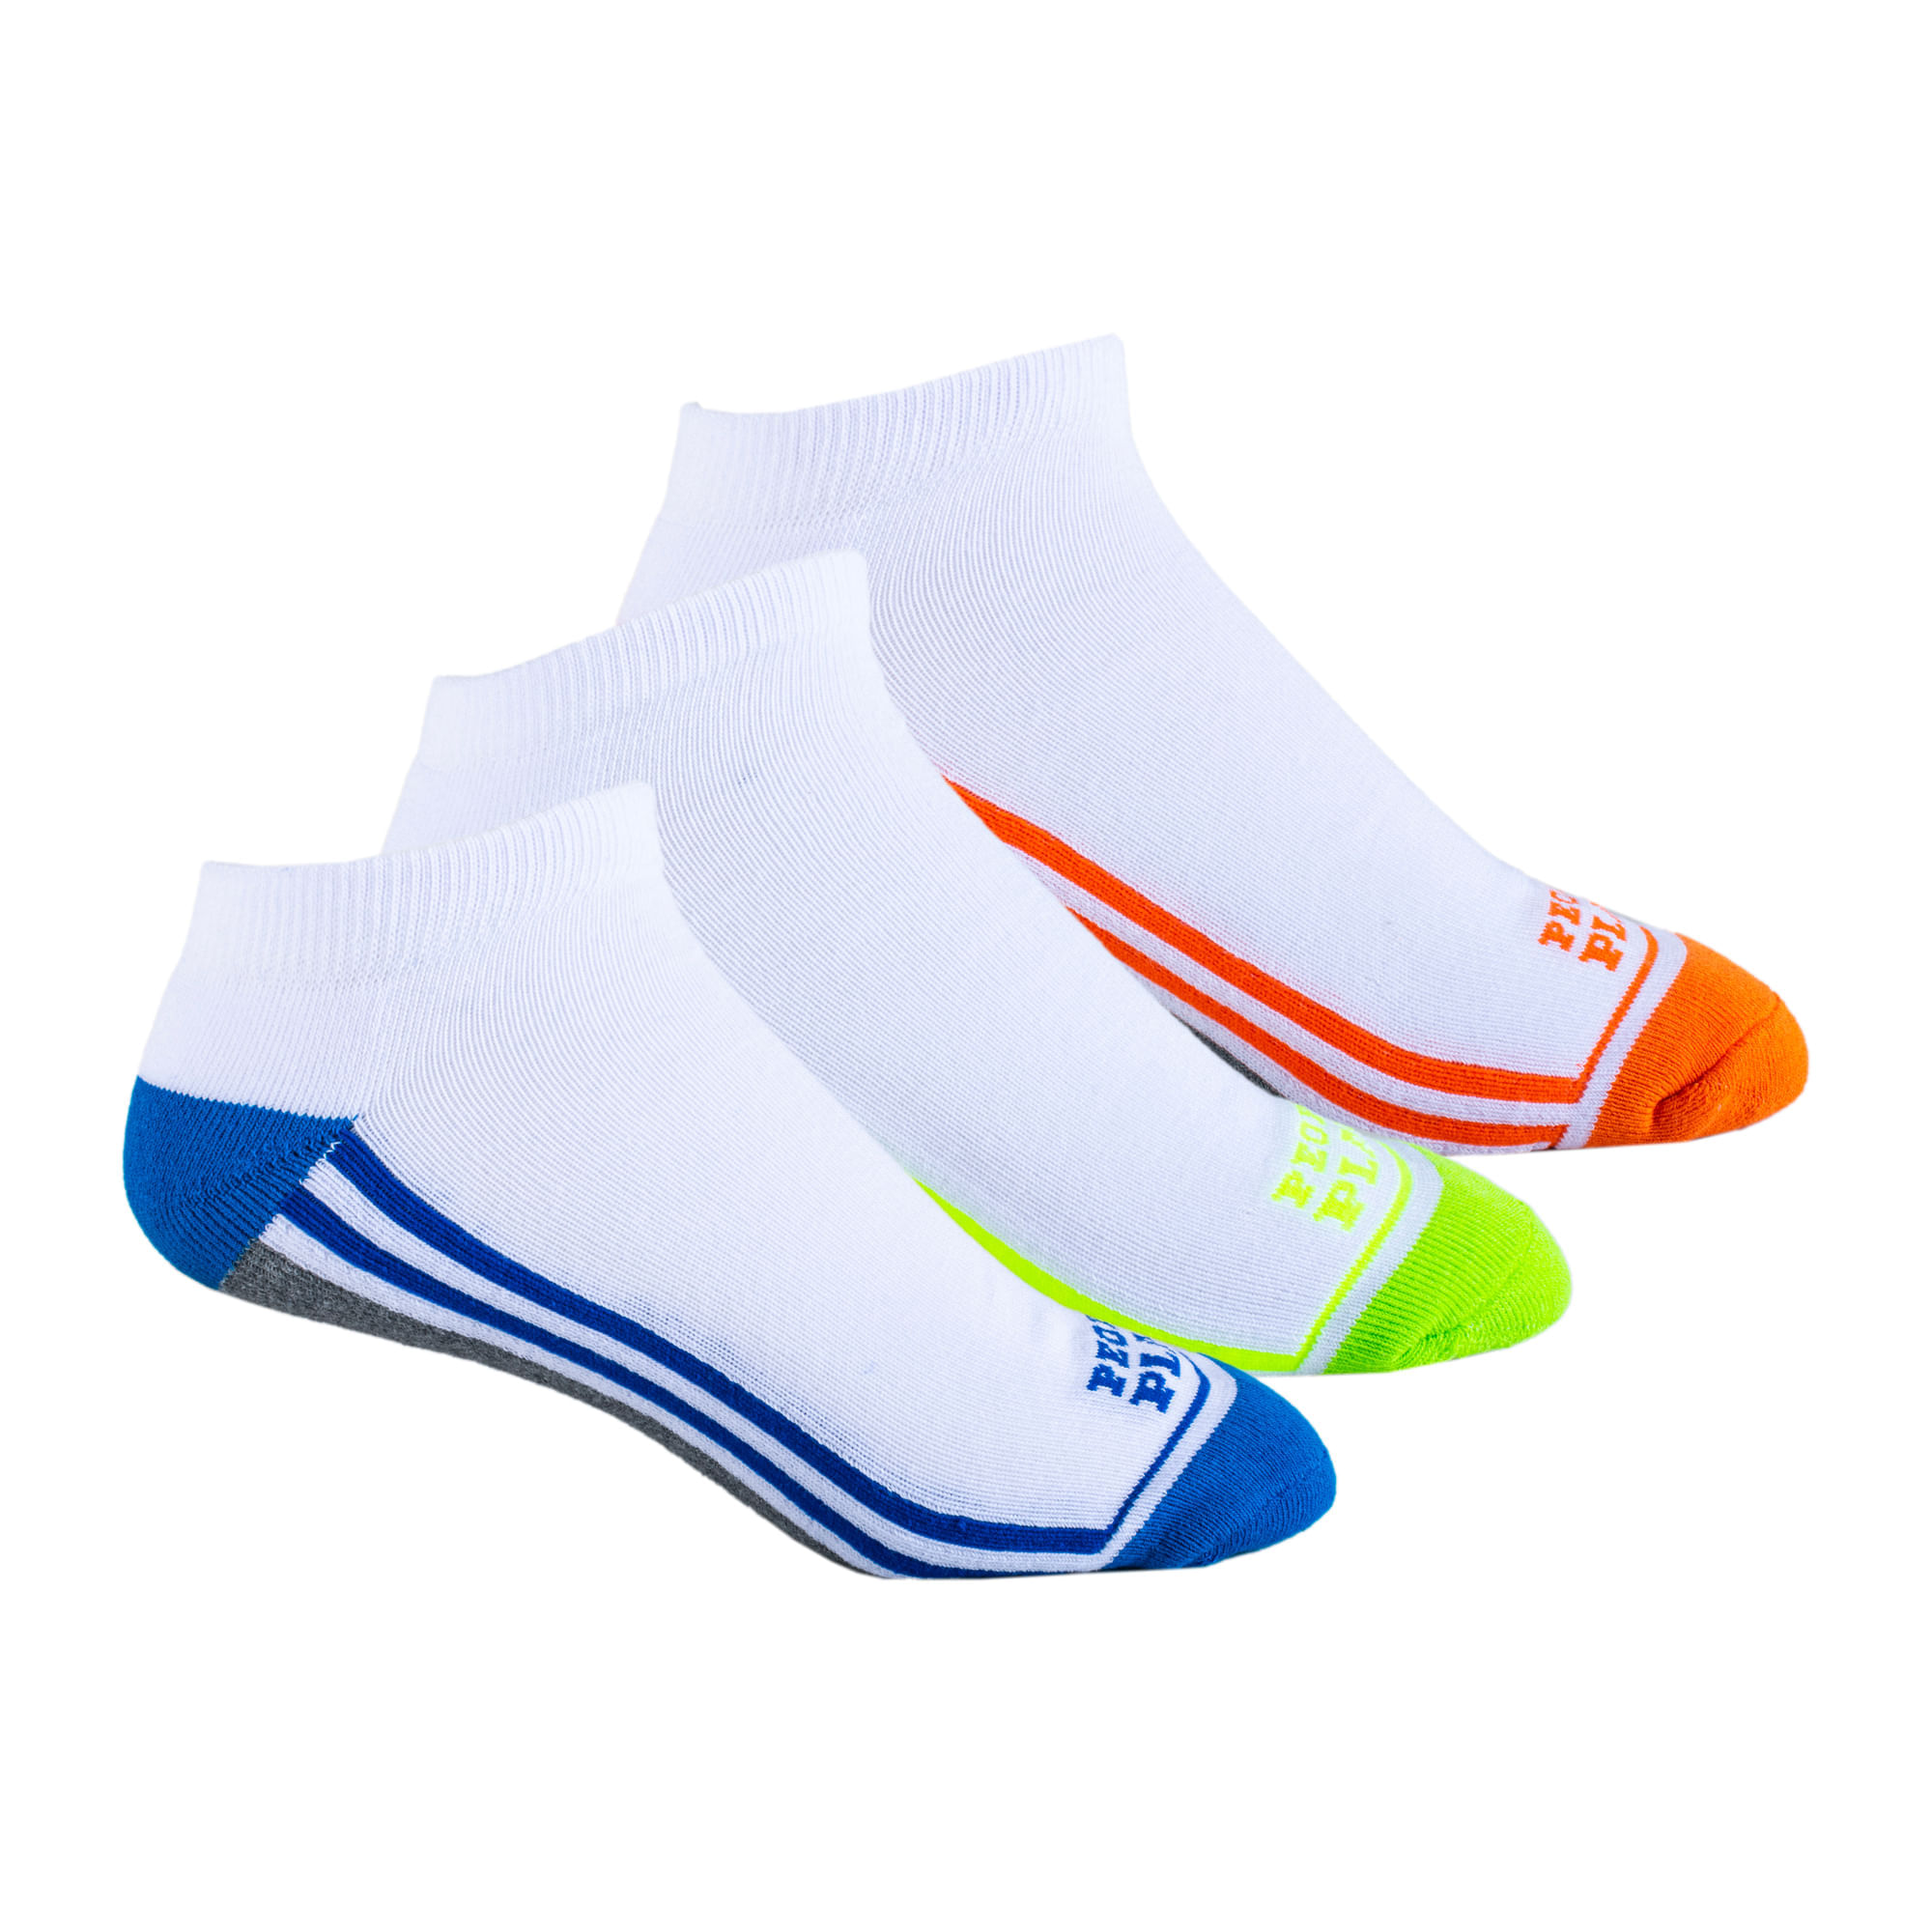 Ripley - PACK 2 CALCETINES HOMBRE 2PK STRP CREW M BLANCO